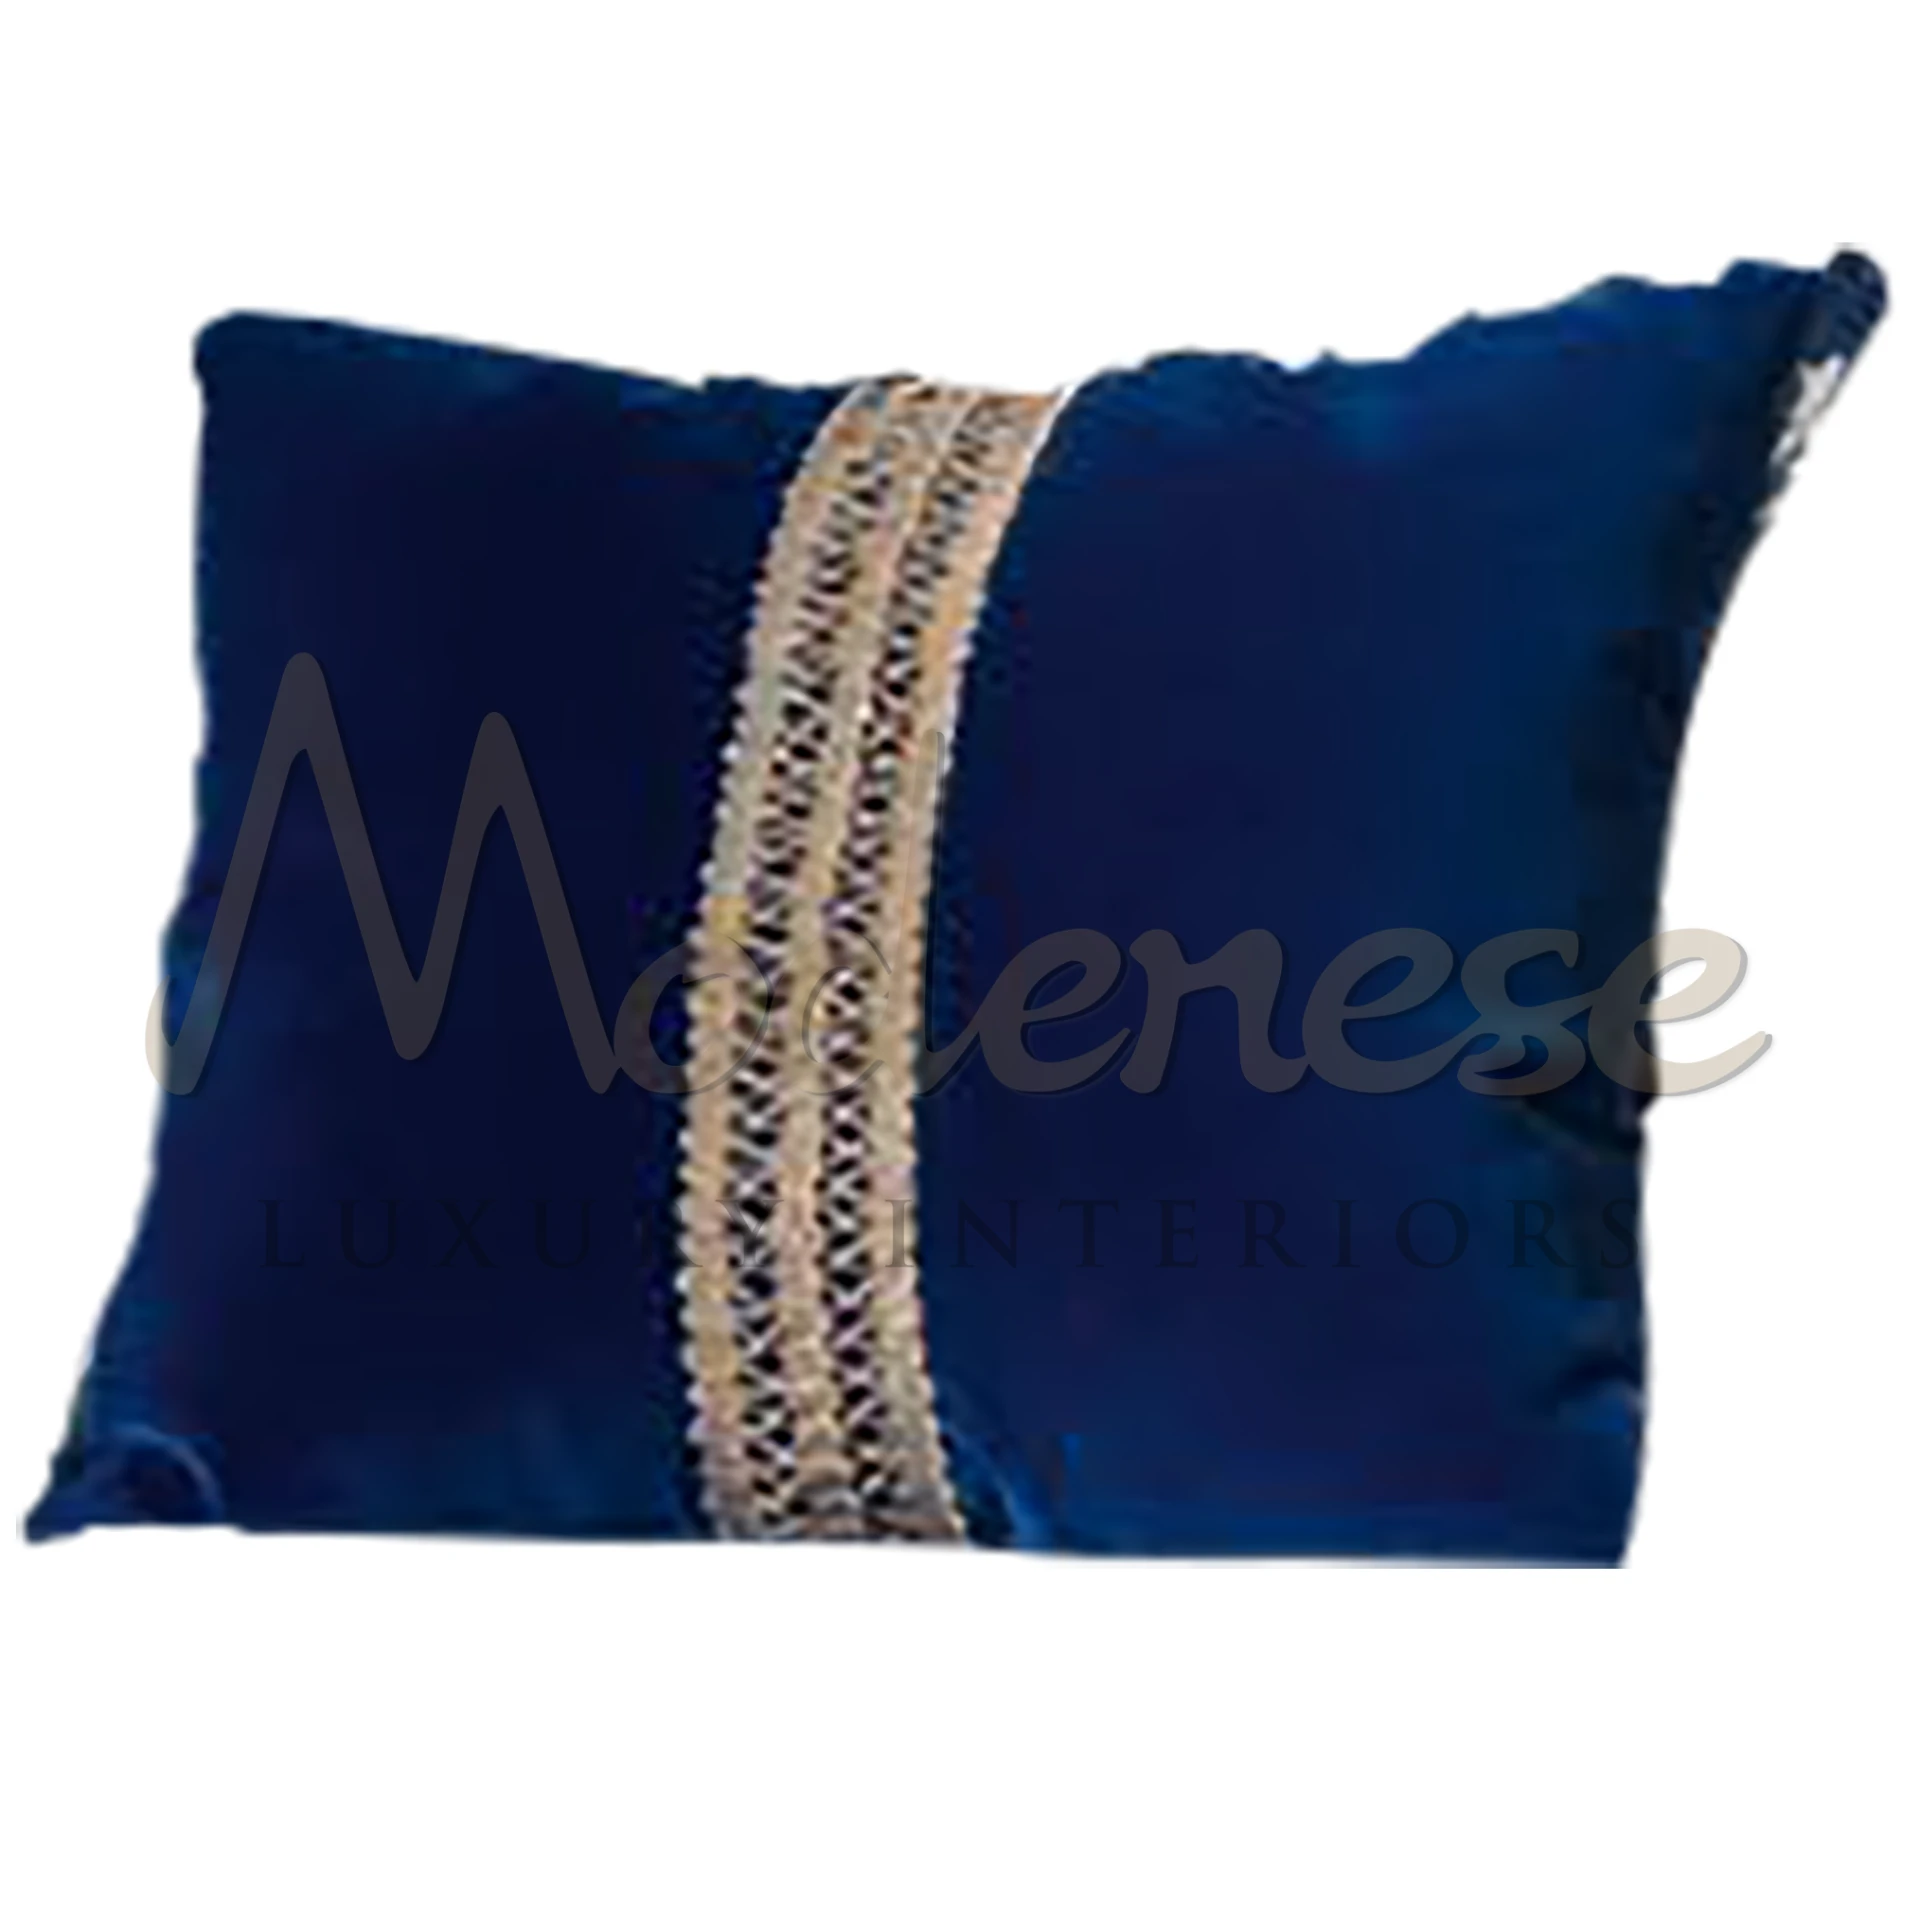 Royal Blue Pillow: A masterpiece of elegance, featuring intricate embroidery and elegant piping for a refined, textured look.